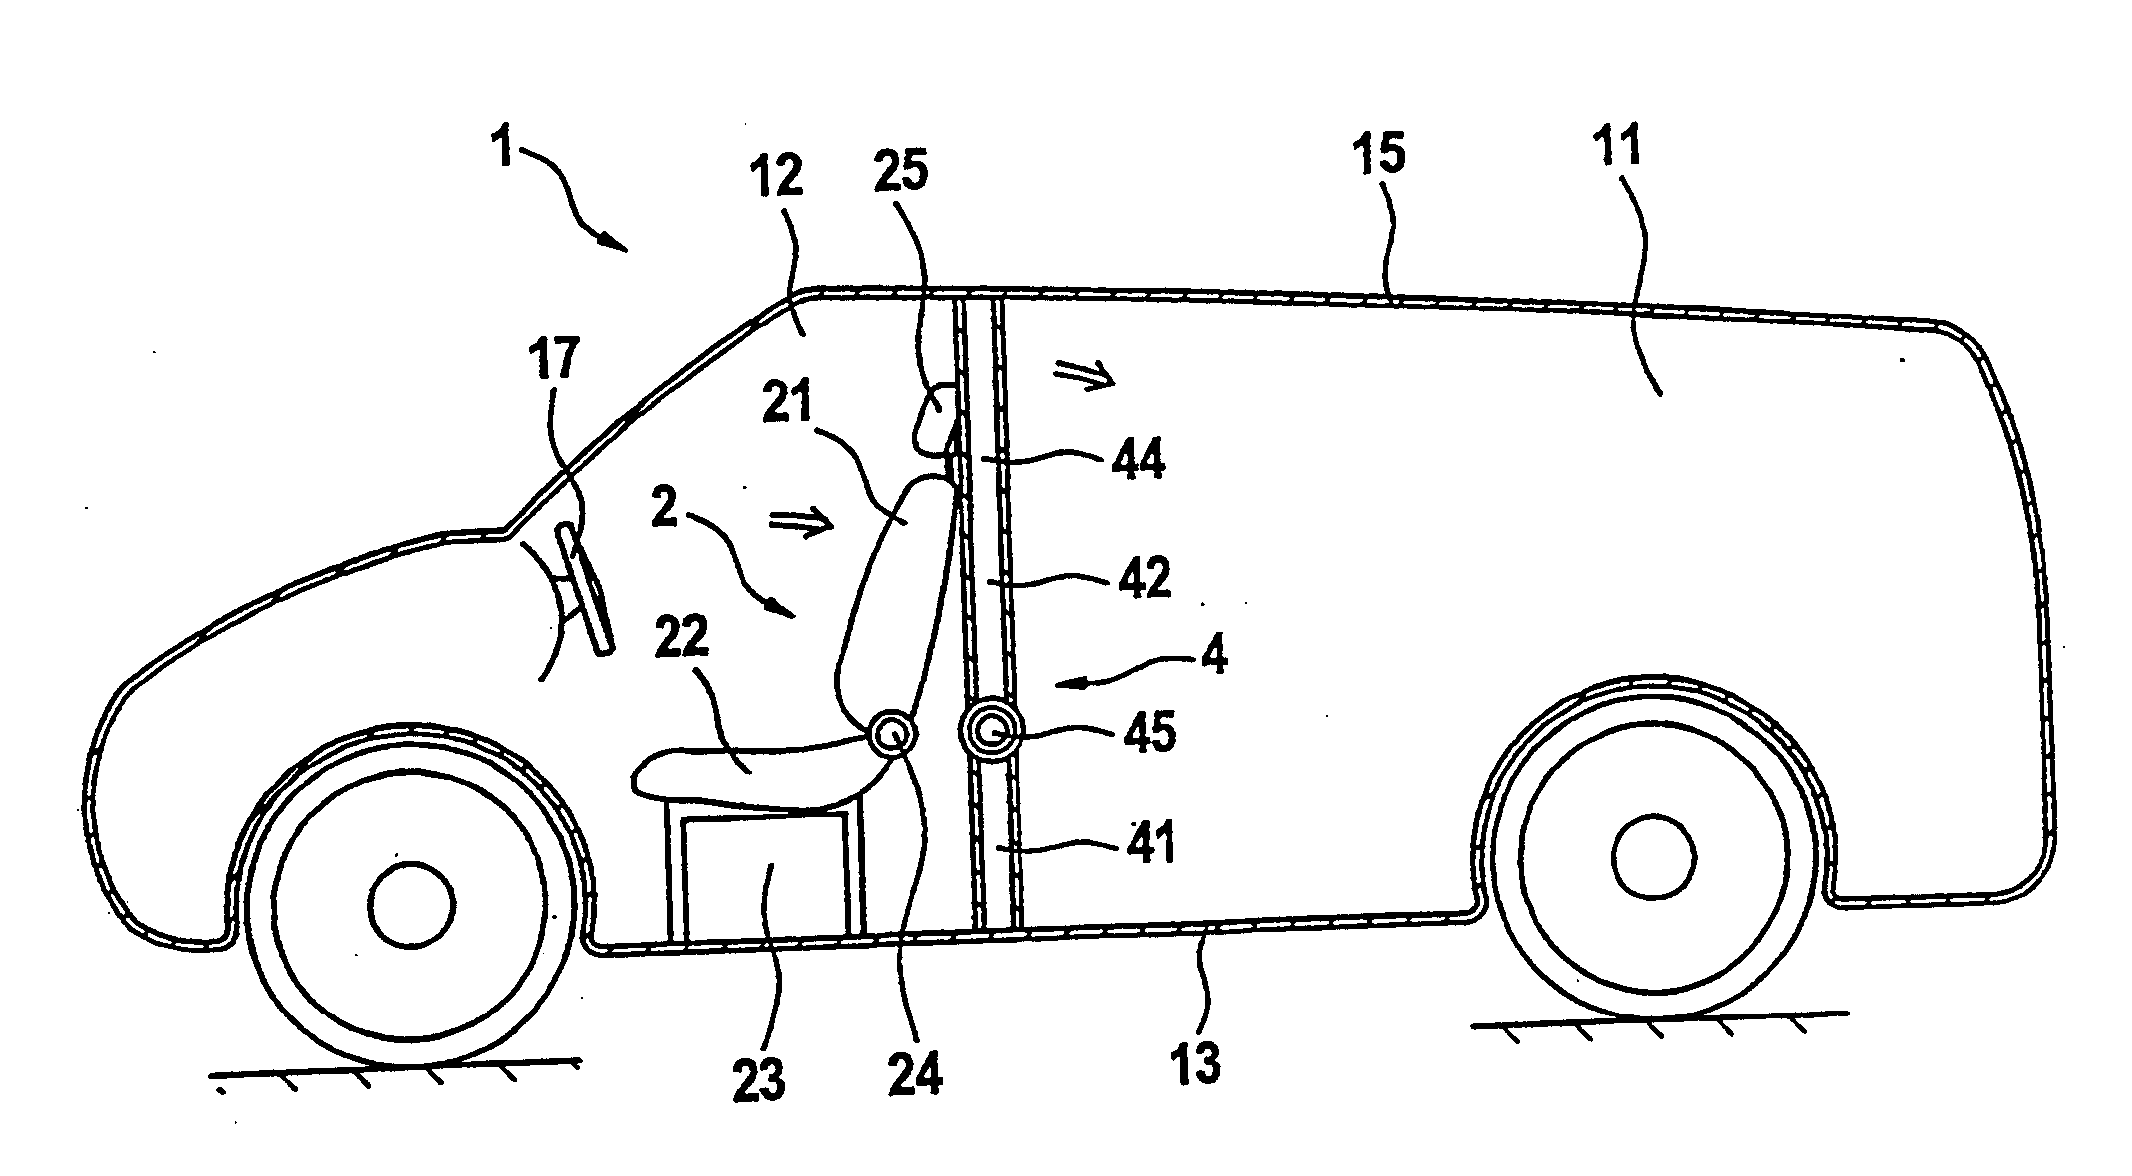 Motor vehicle with partition